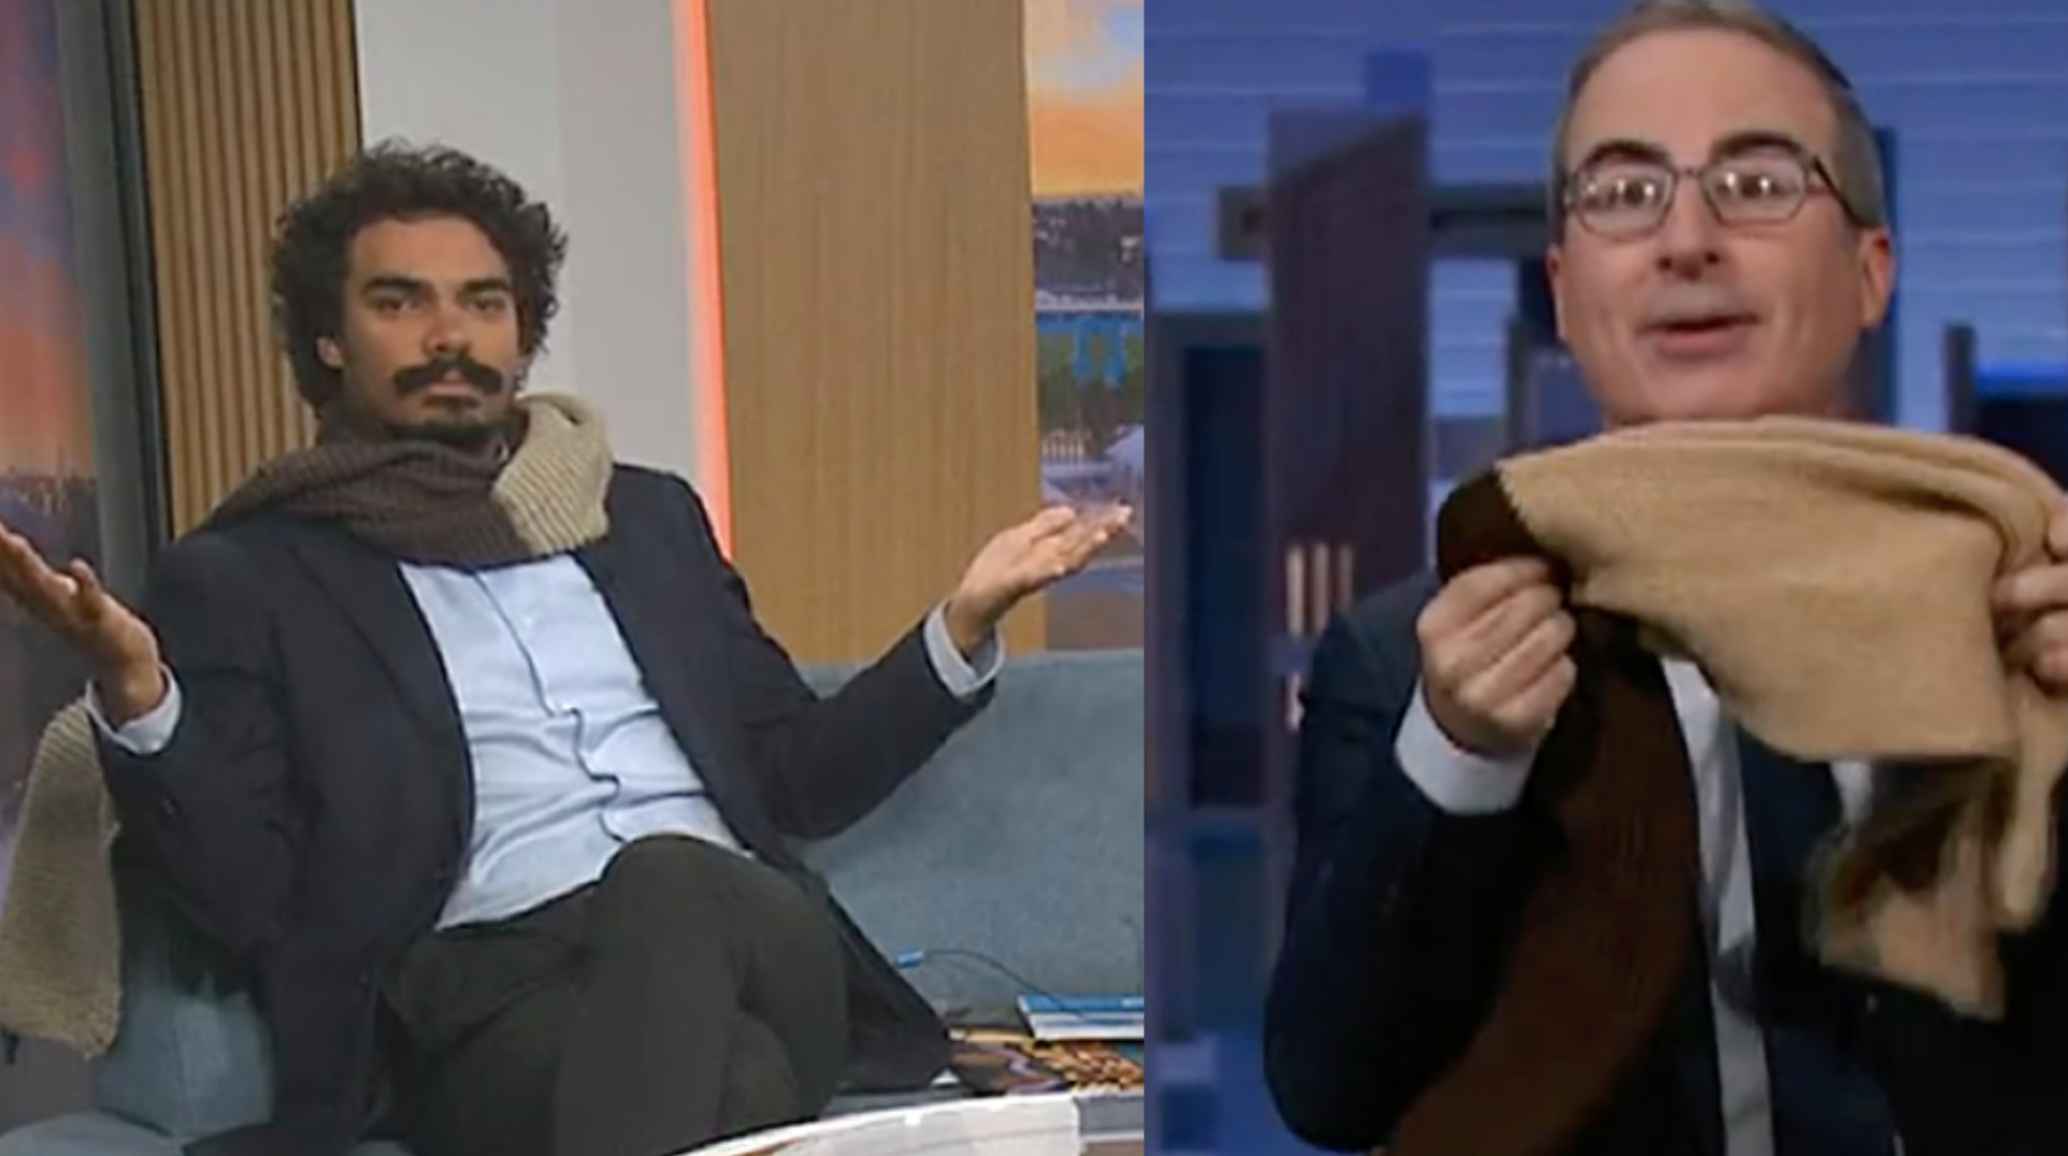 John Oliver’s claim to own Tony Armstrong’s mother’s scarf